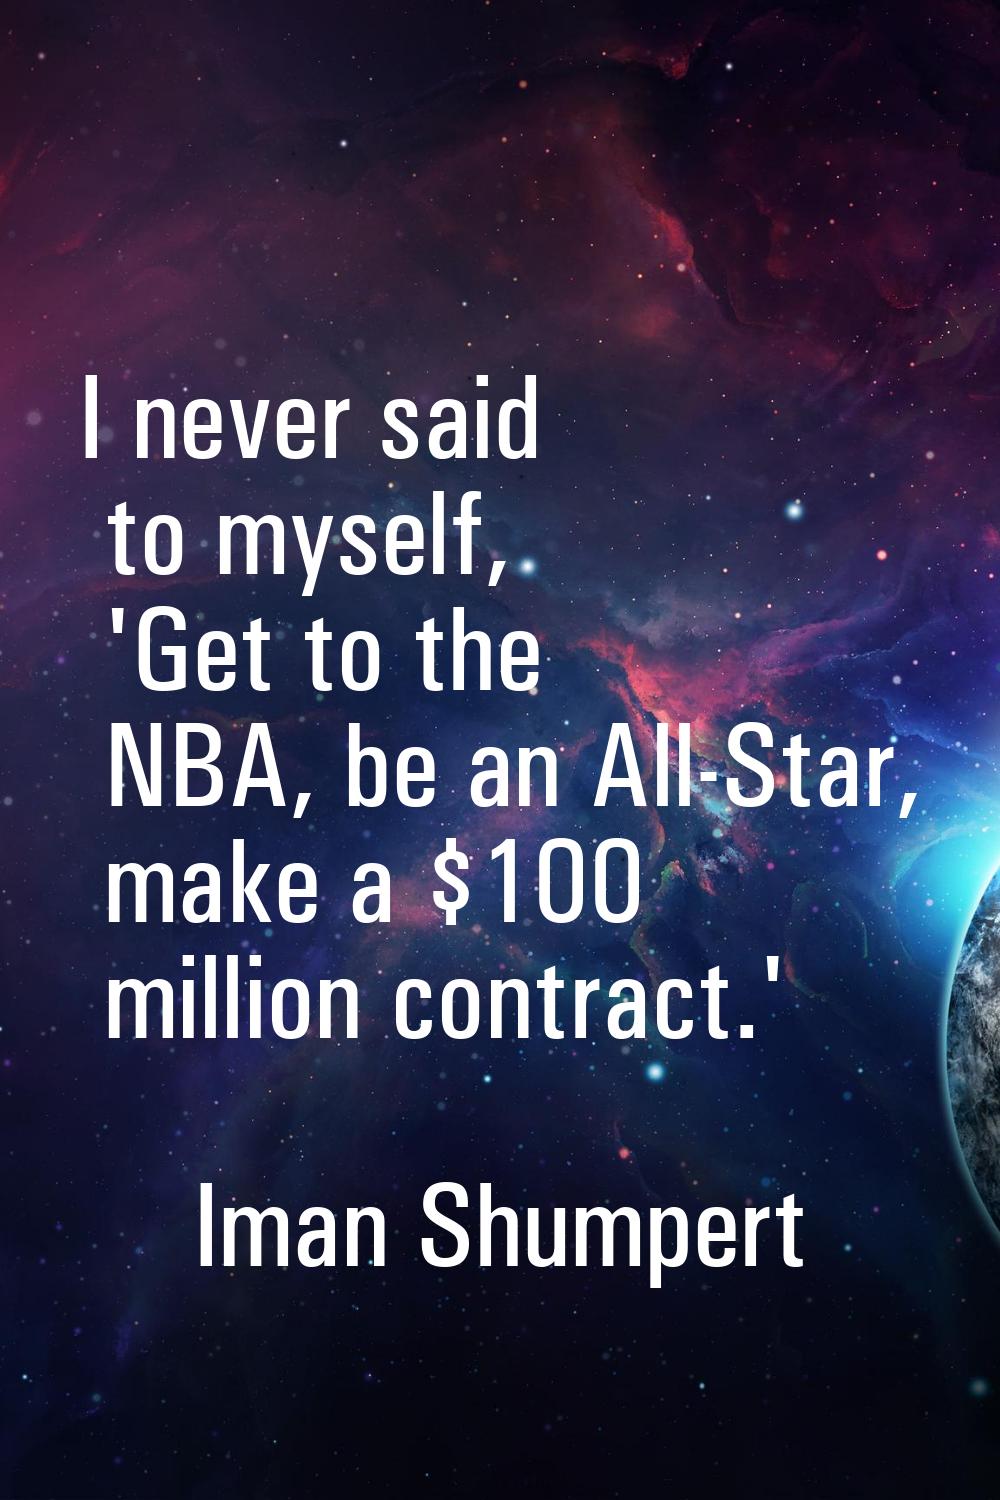 I never said to myself, 'Get to the NBA, be an All-Star, make a $100 million contract.'